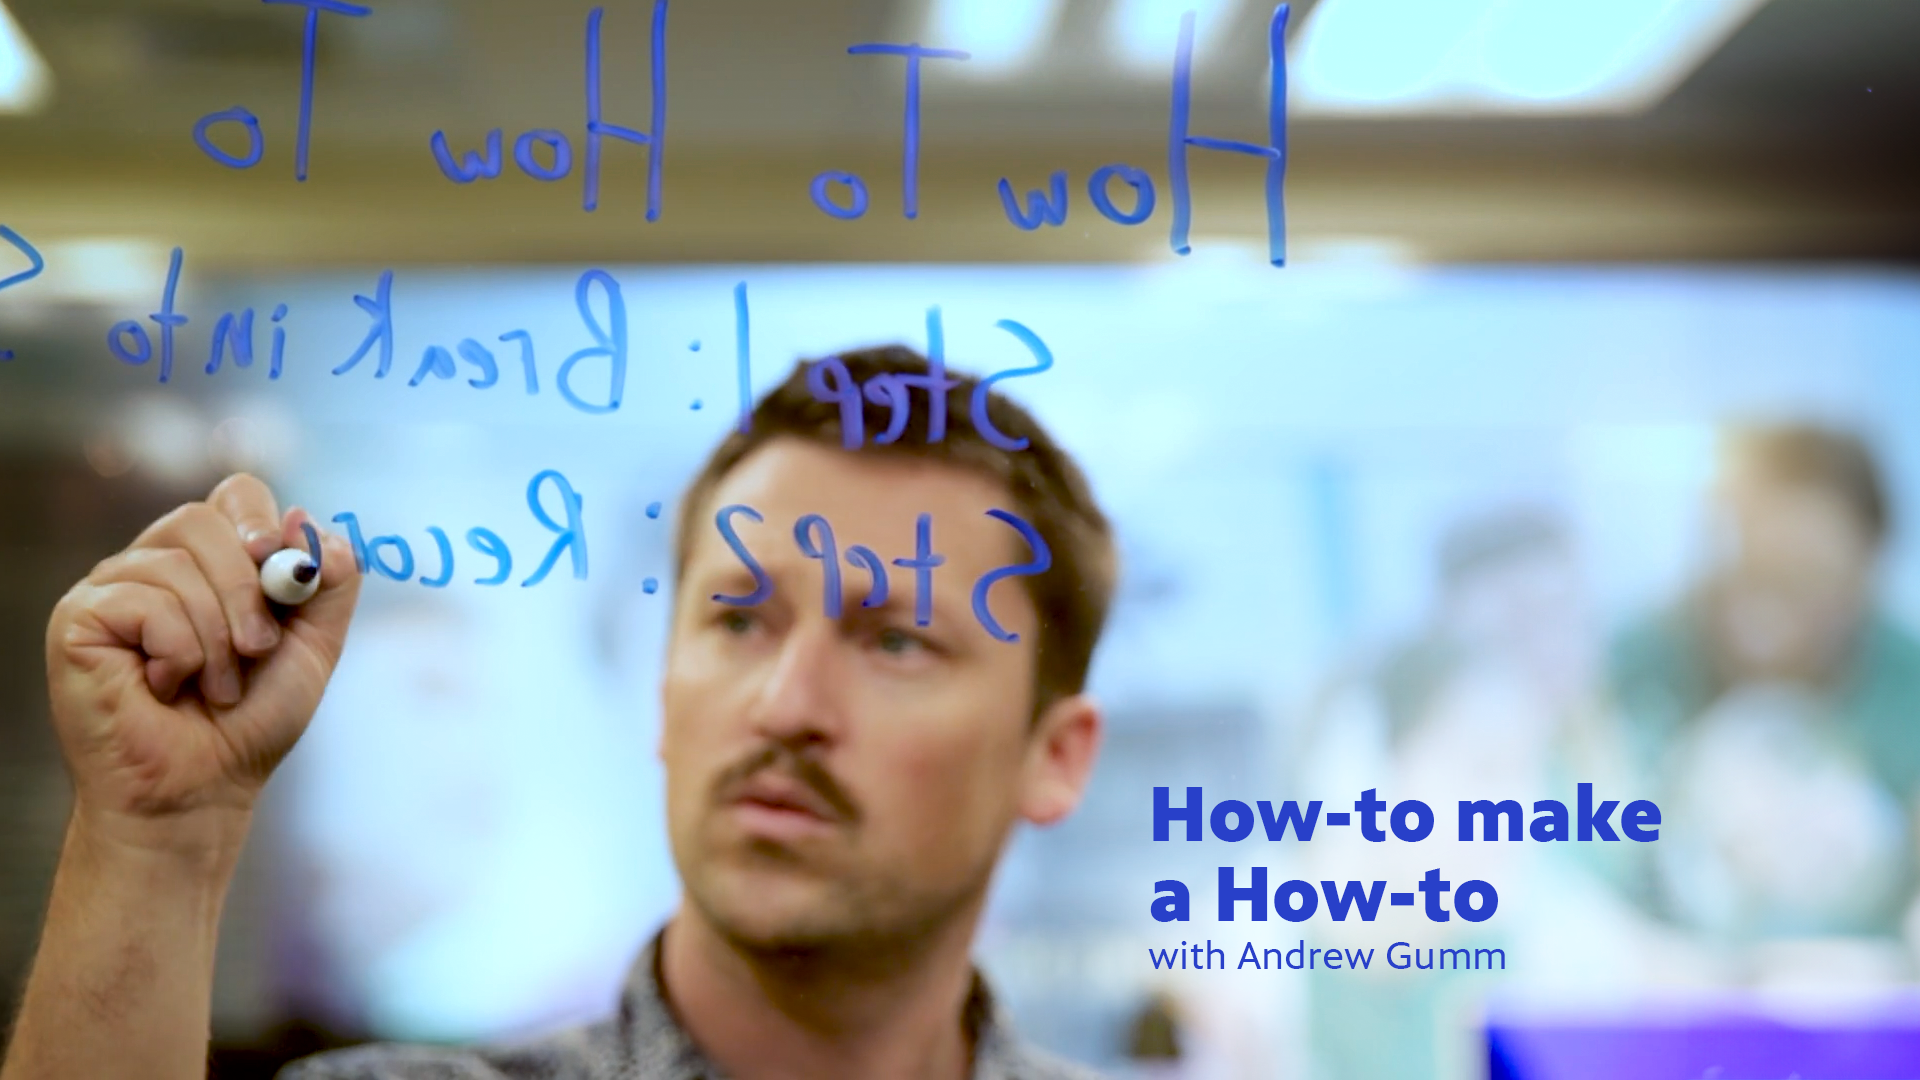 How-To, How-to with Andrew Gumm